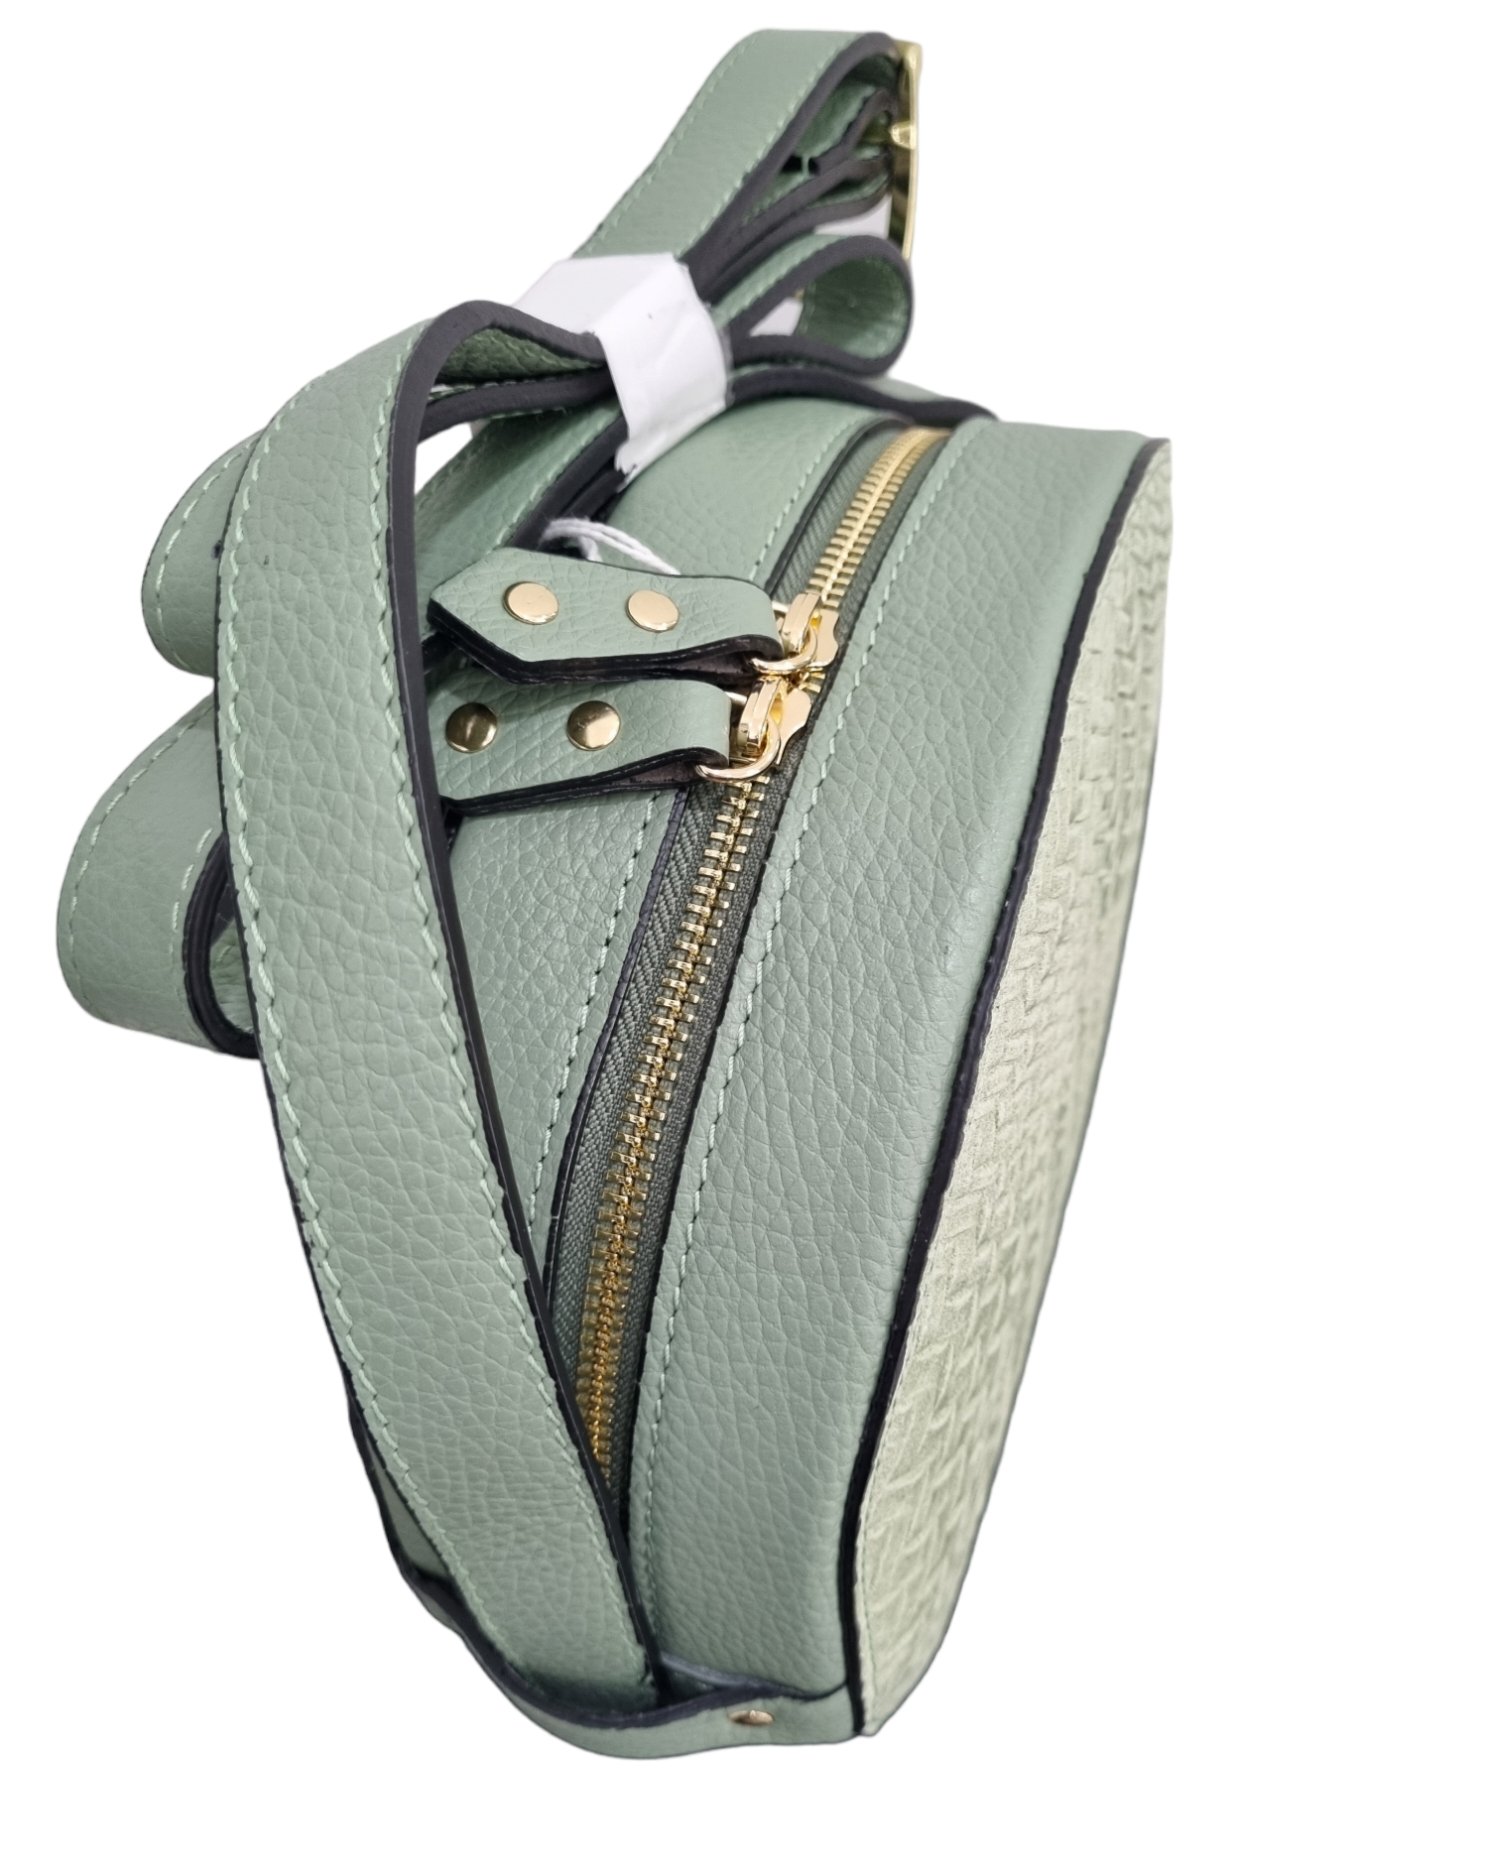 Shoulder bag in real leather woven on the front and back, made in Italy, single compartment in suede interior, zip opening. Wide adjustable shoulder strap. sage green color measures H21 B 7 L17/24